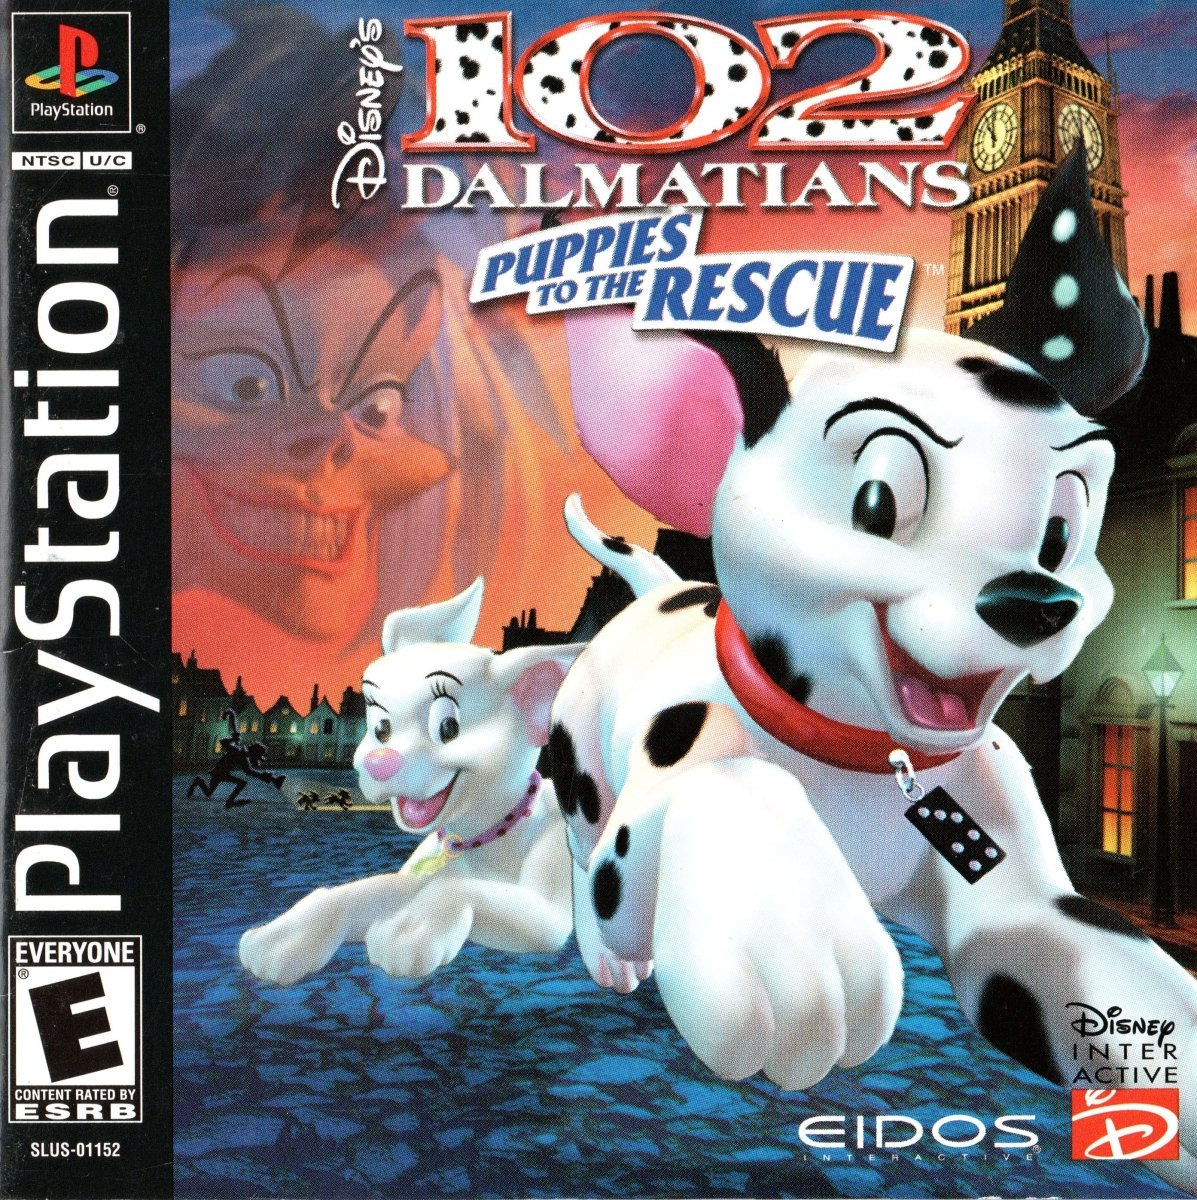 102 Dalmatians Puppies to the Rescue - Playstation - Retro Island Gaming